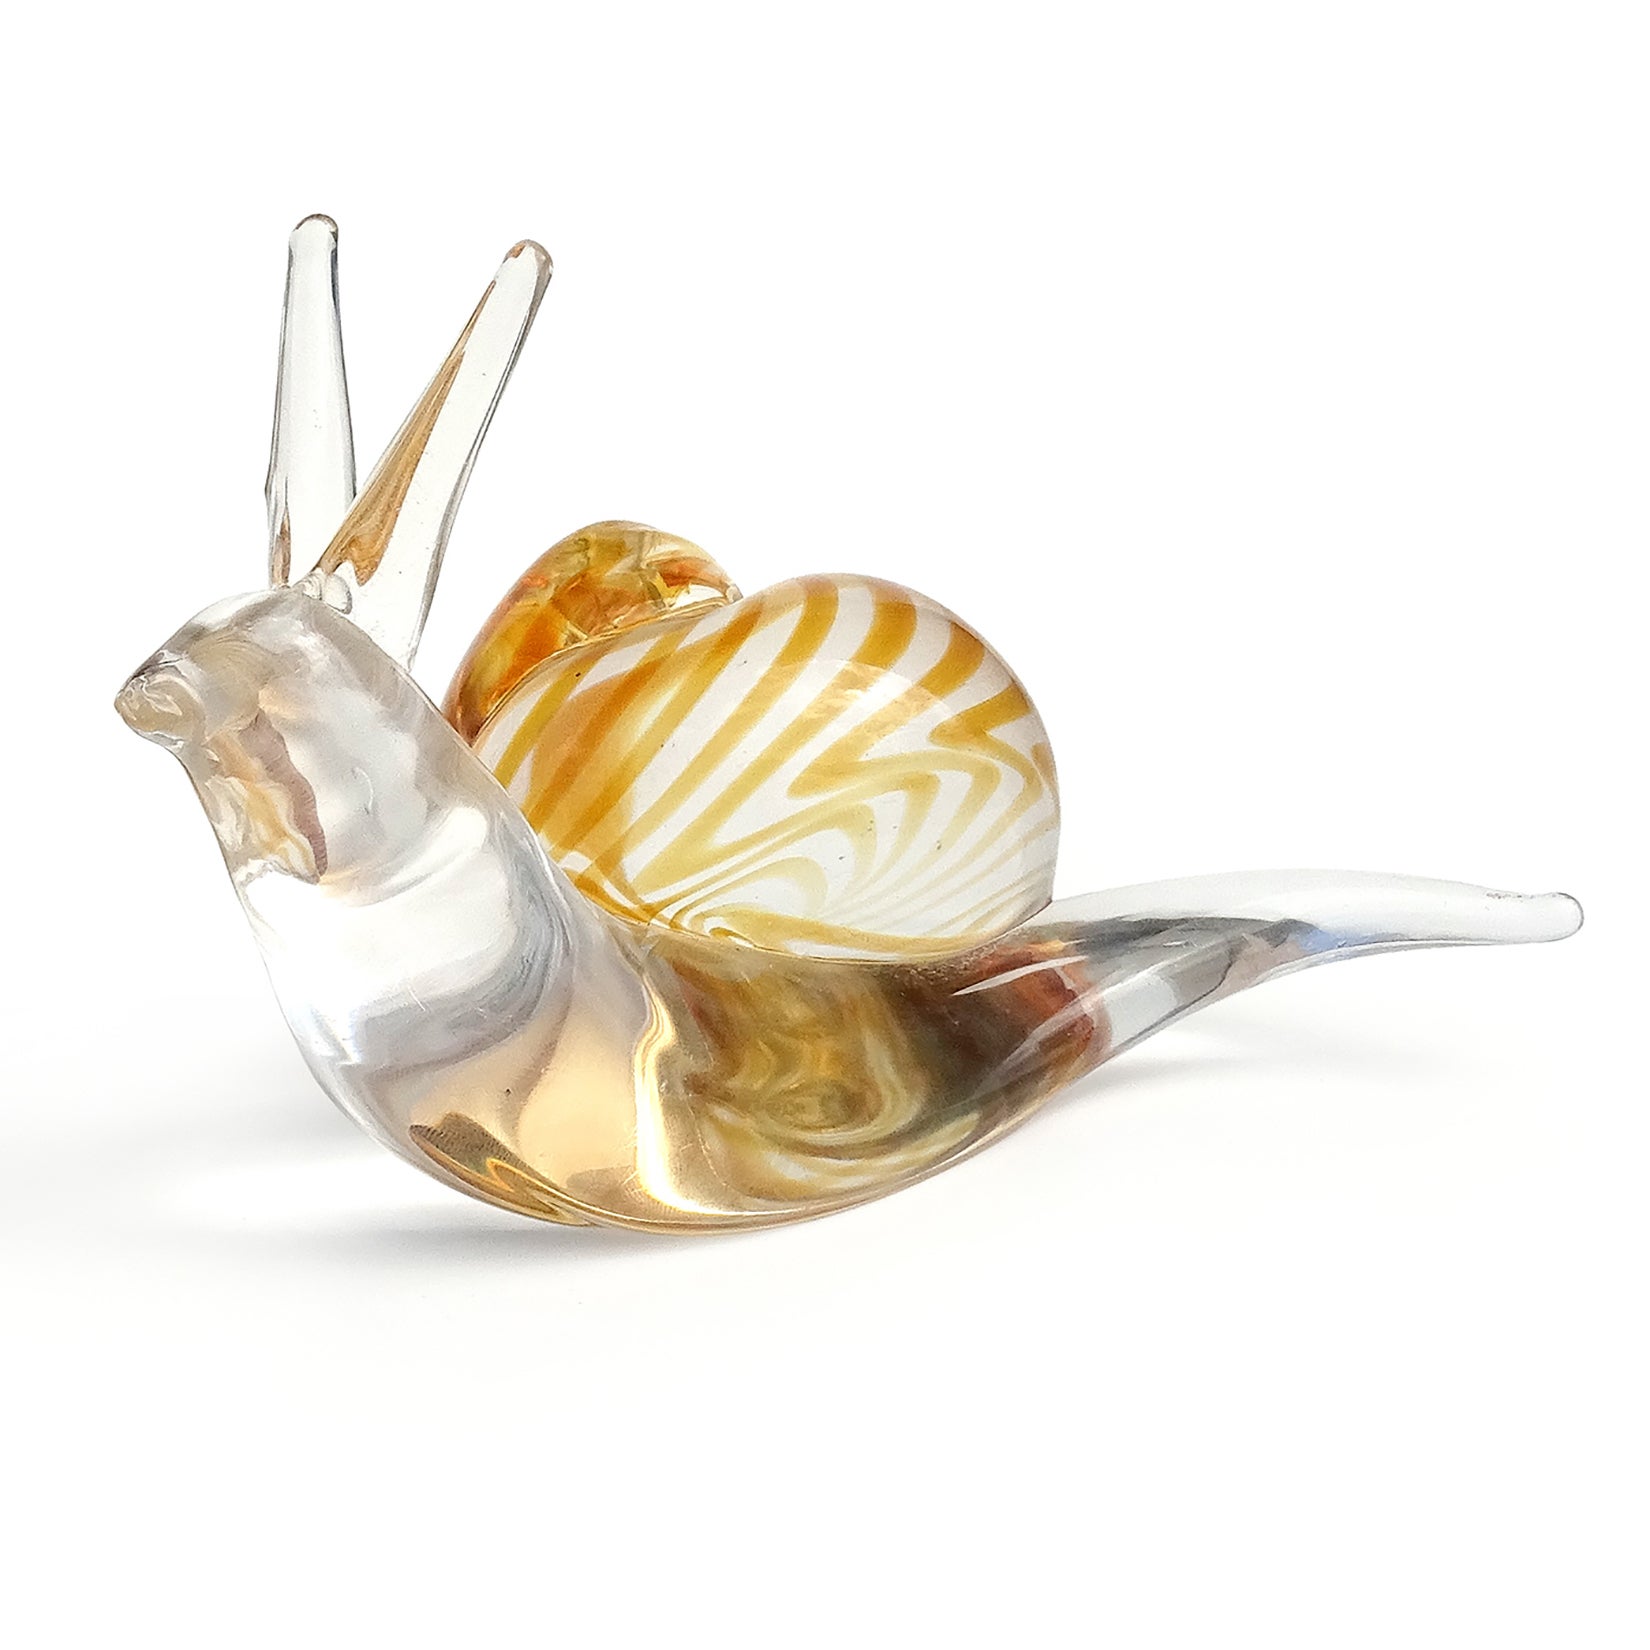 Snail Decor Murano Drink Glasses, Funny Wine Glass, Glass Water